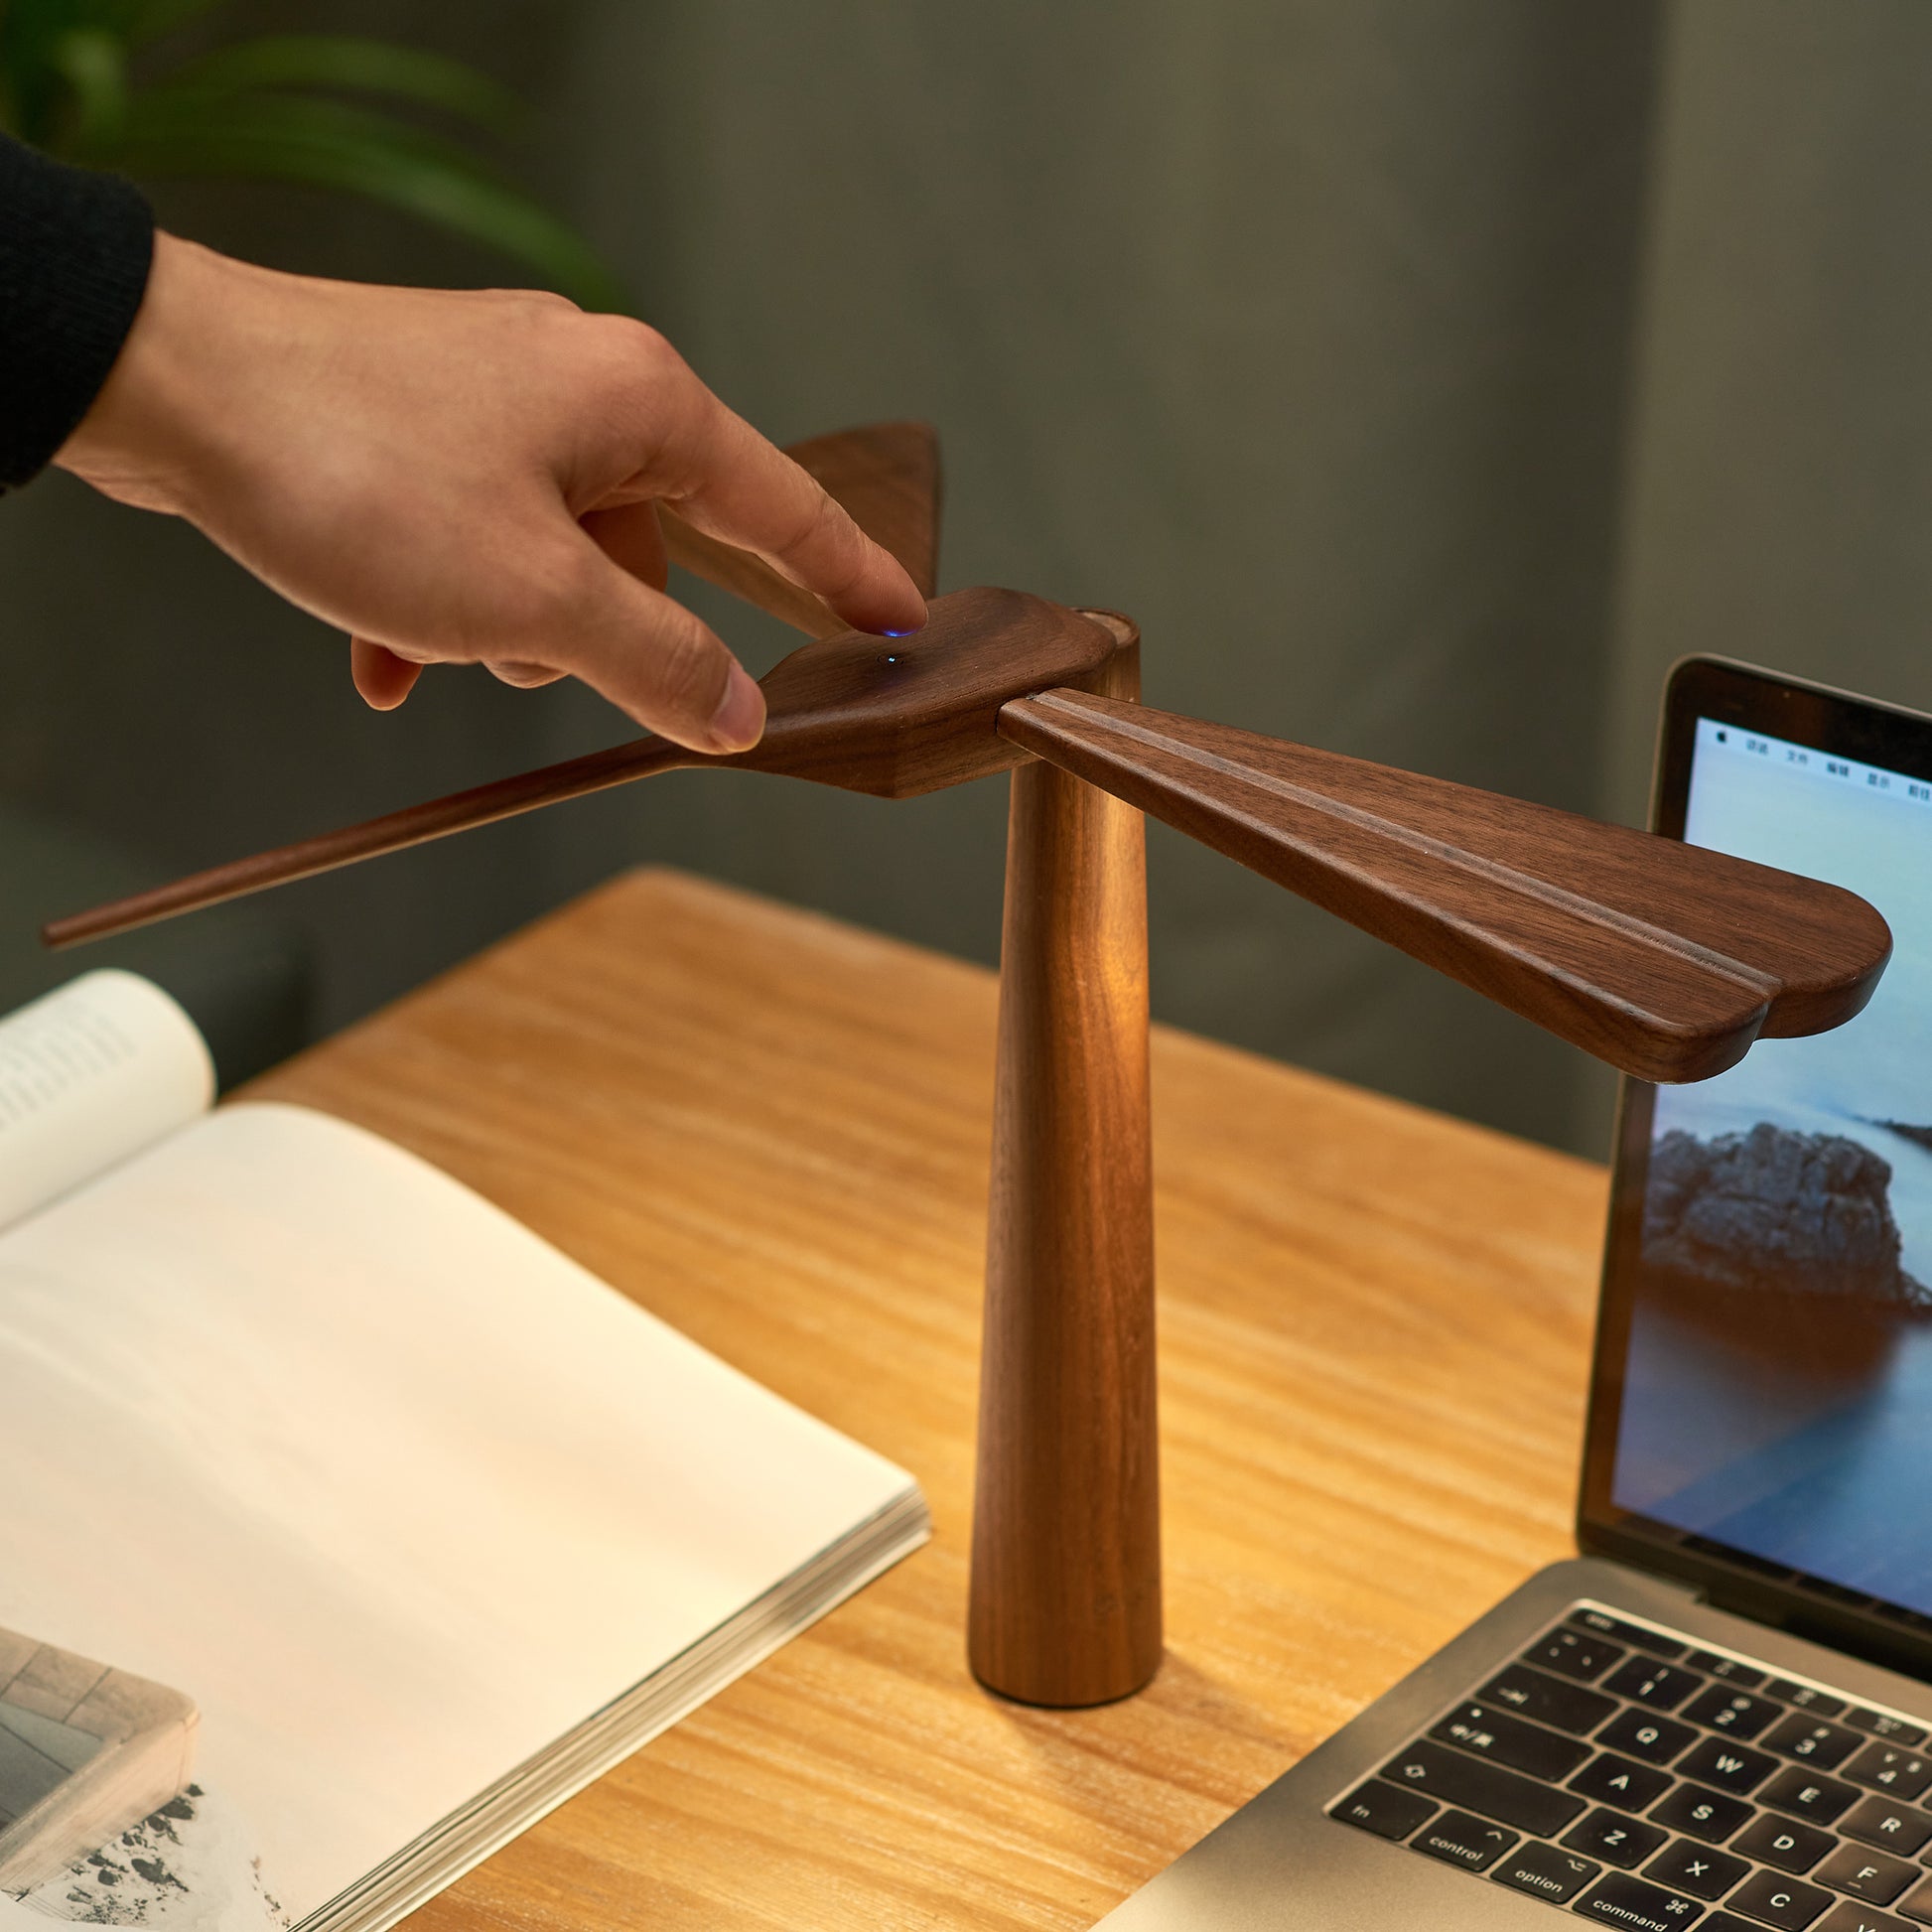 dragon flight lamp by gingko on wooden desk next to macbook